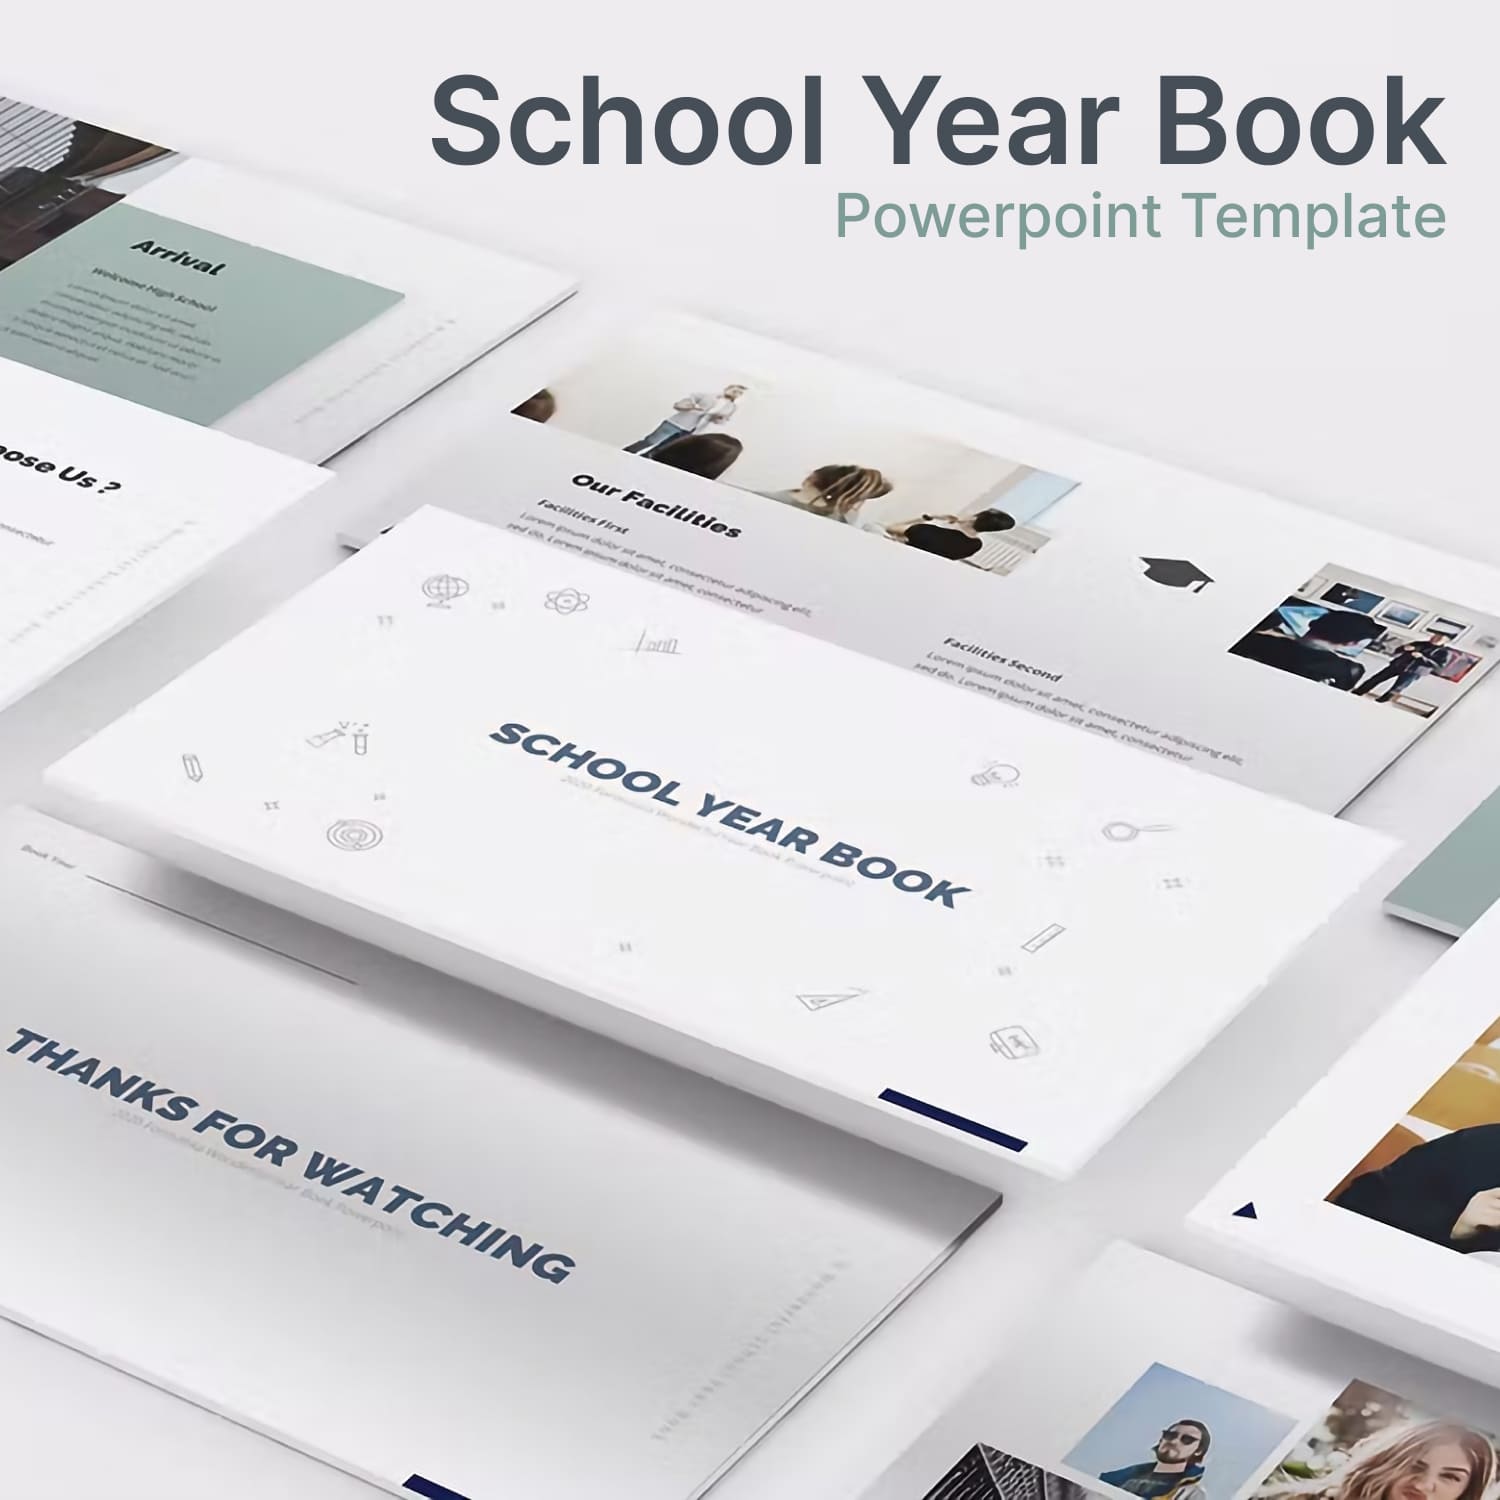 School year book powerpoint template - main image preview.